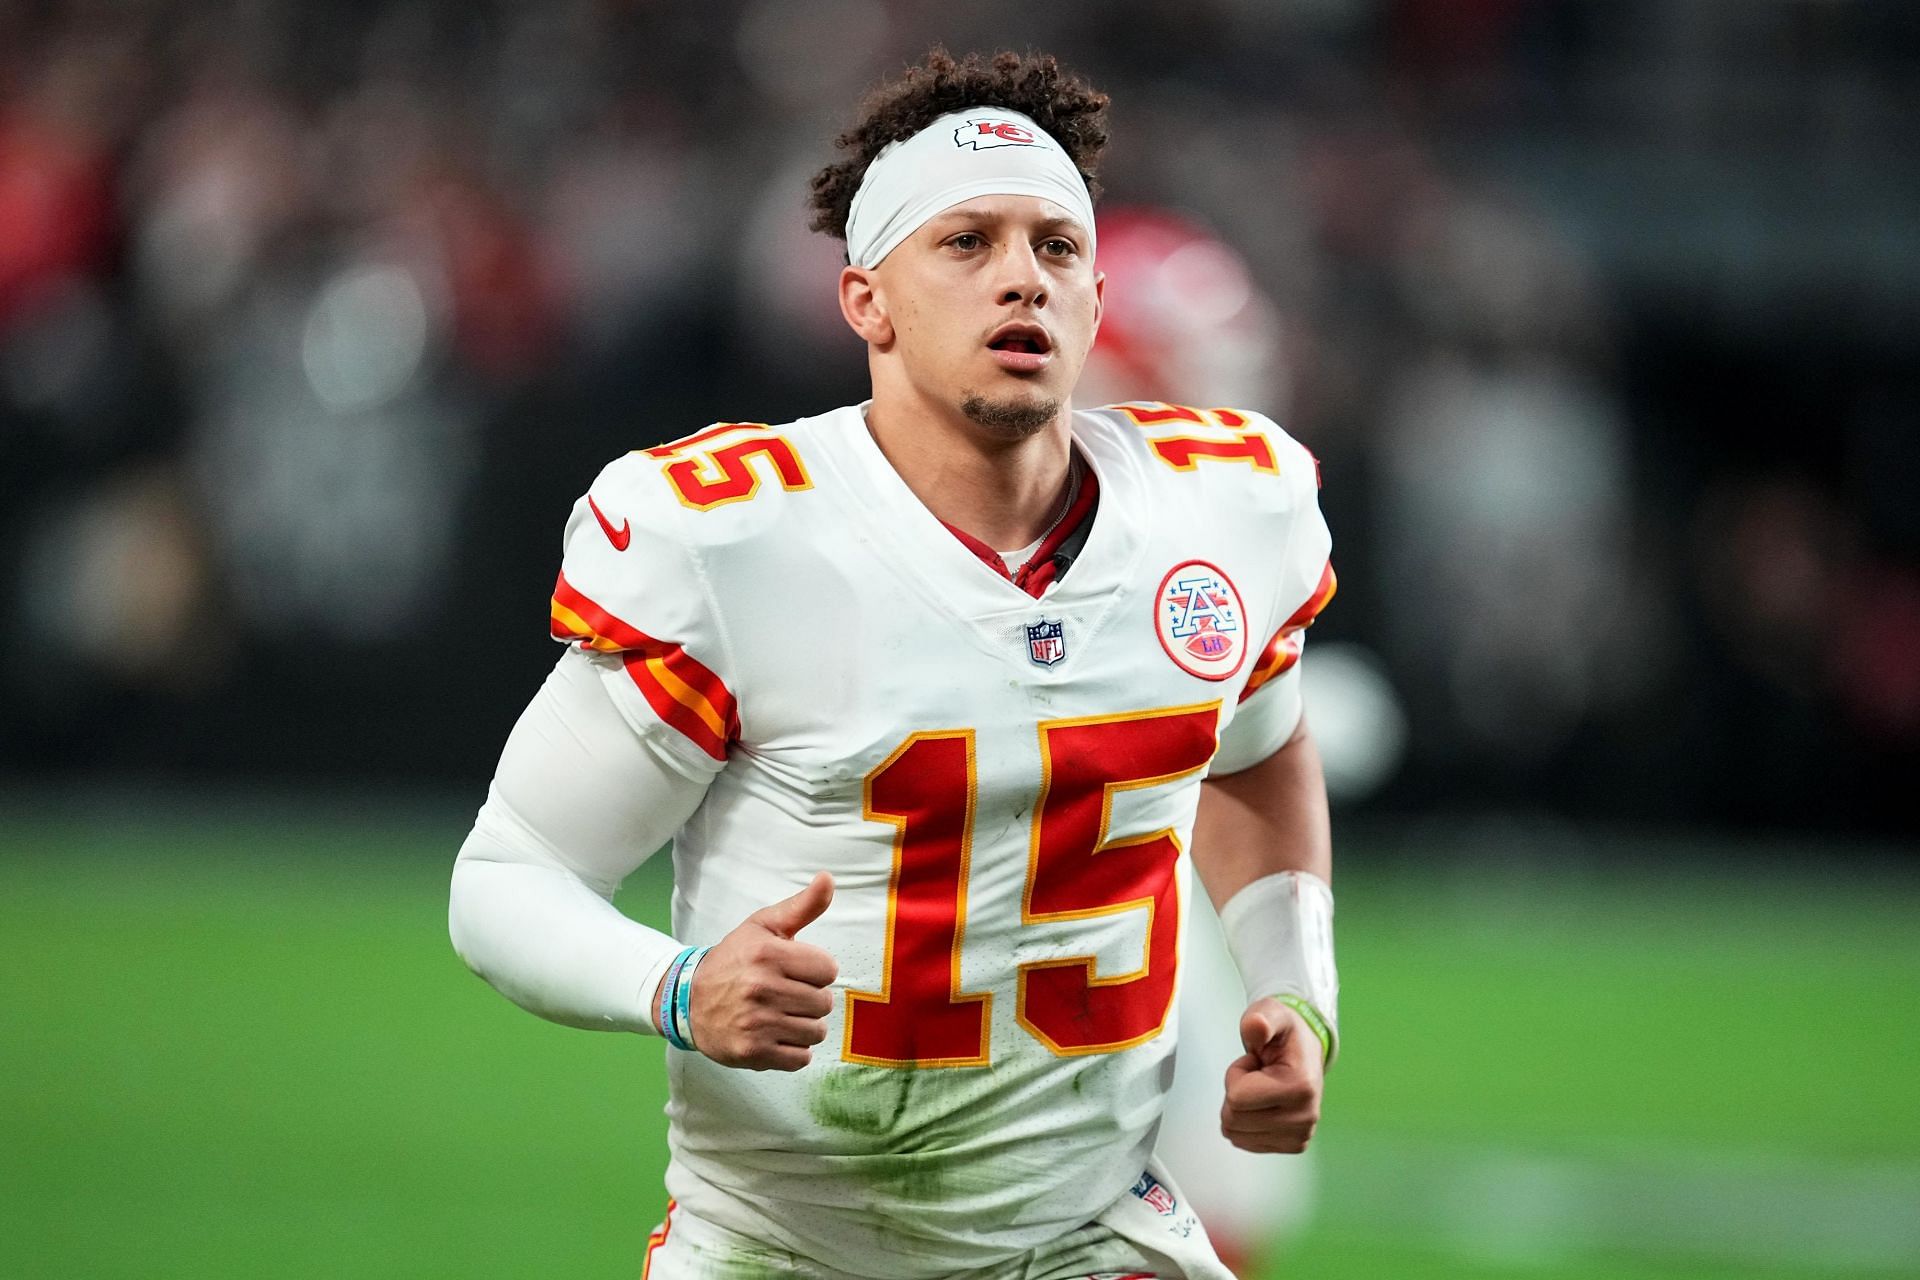 AFC Championship Game 2023: Bengals vs Chiefs location, date, time